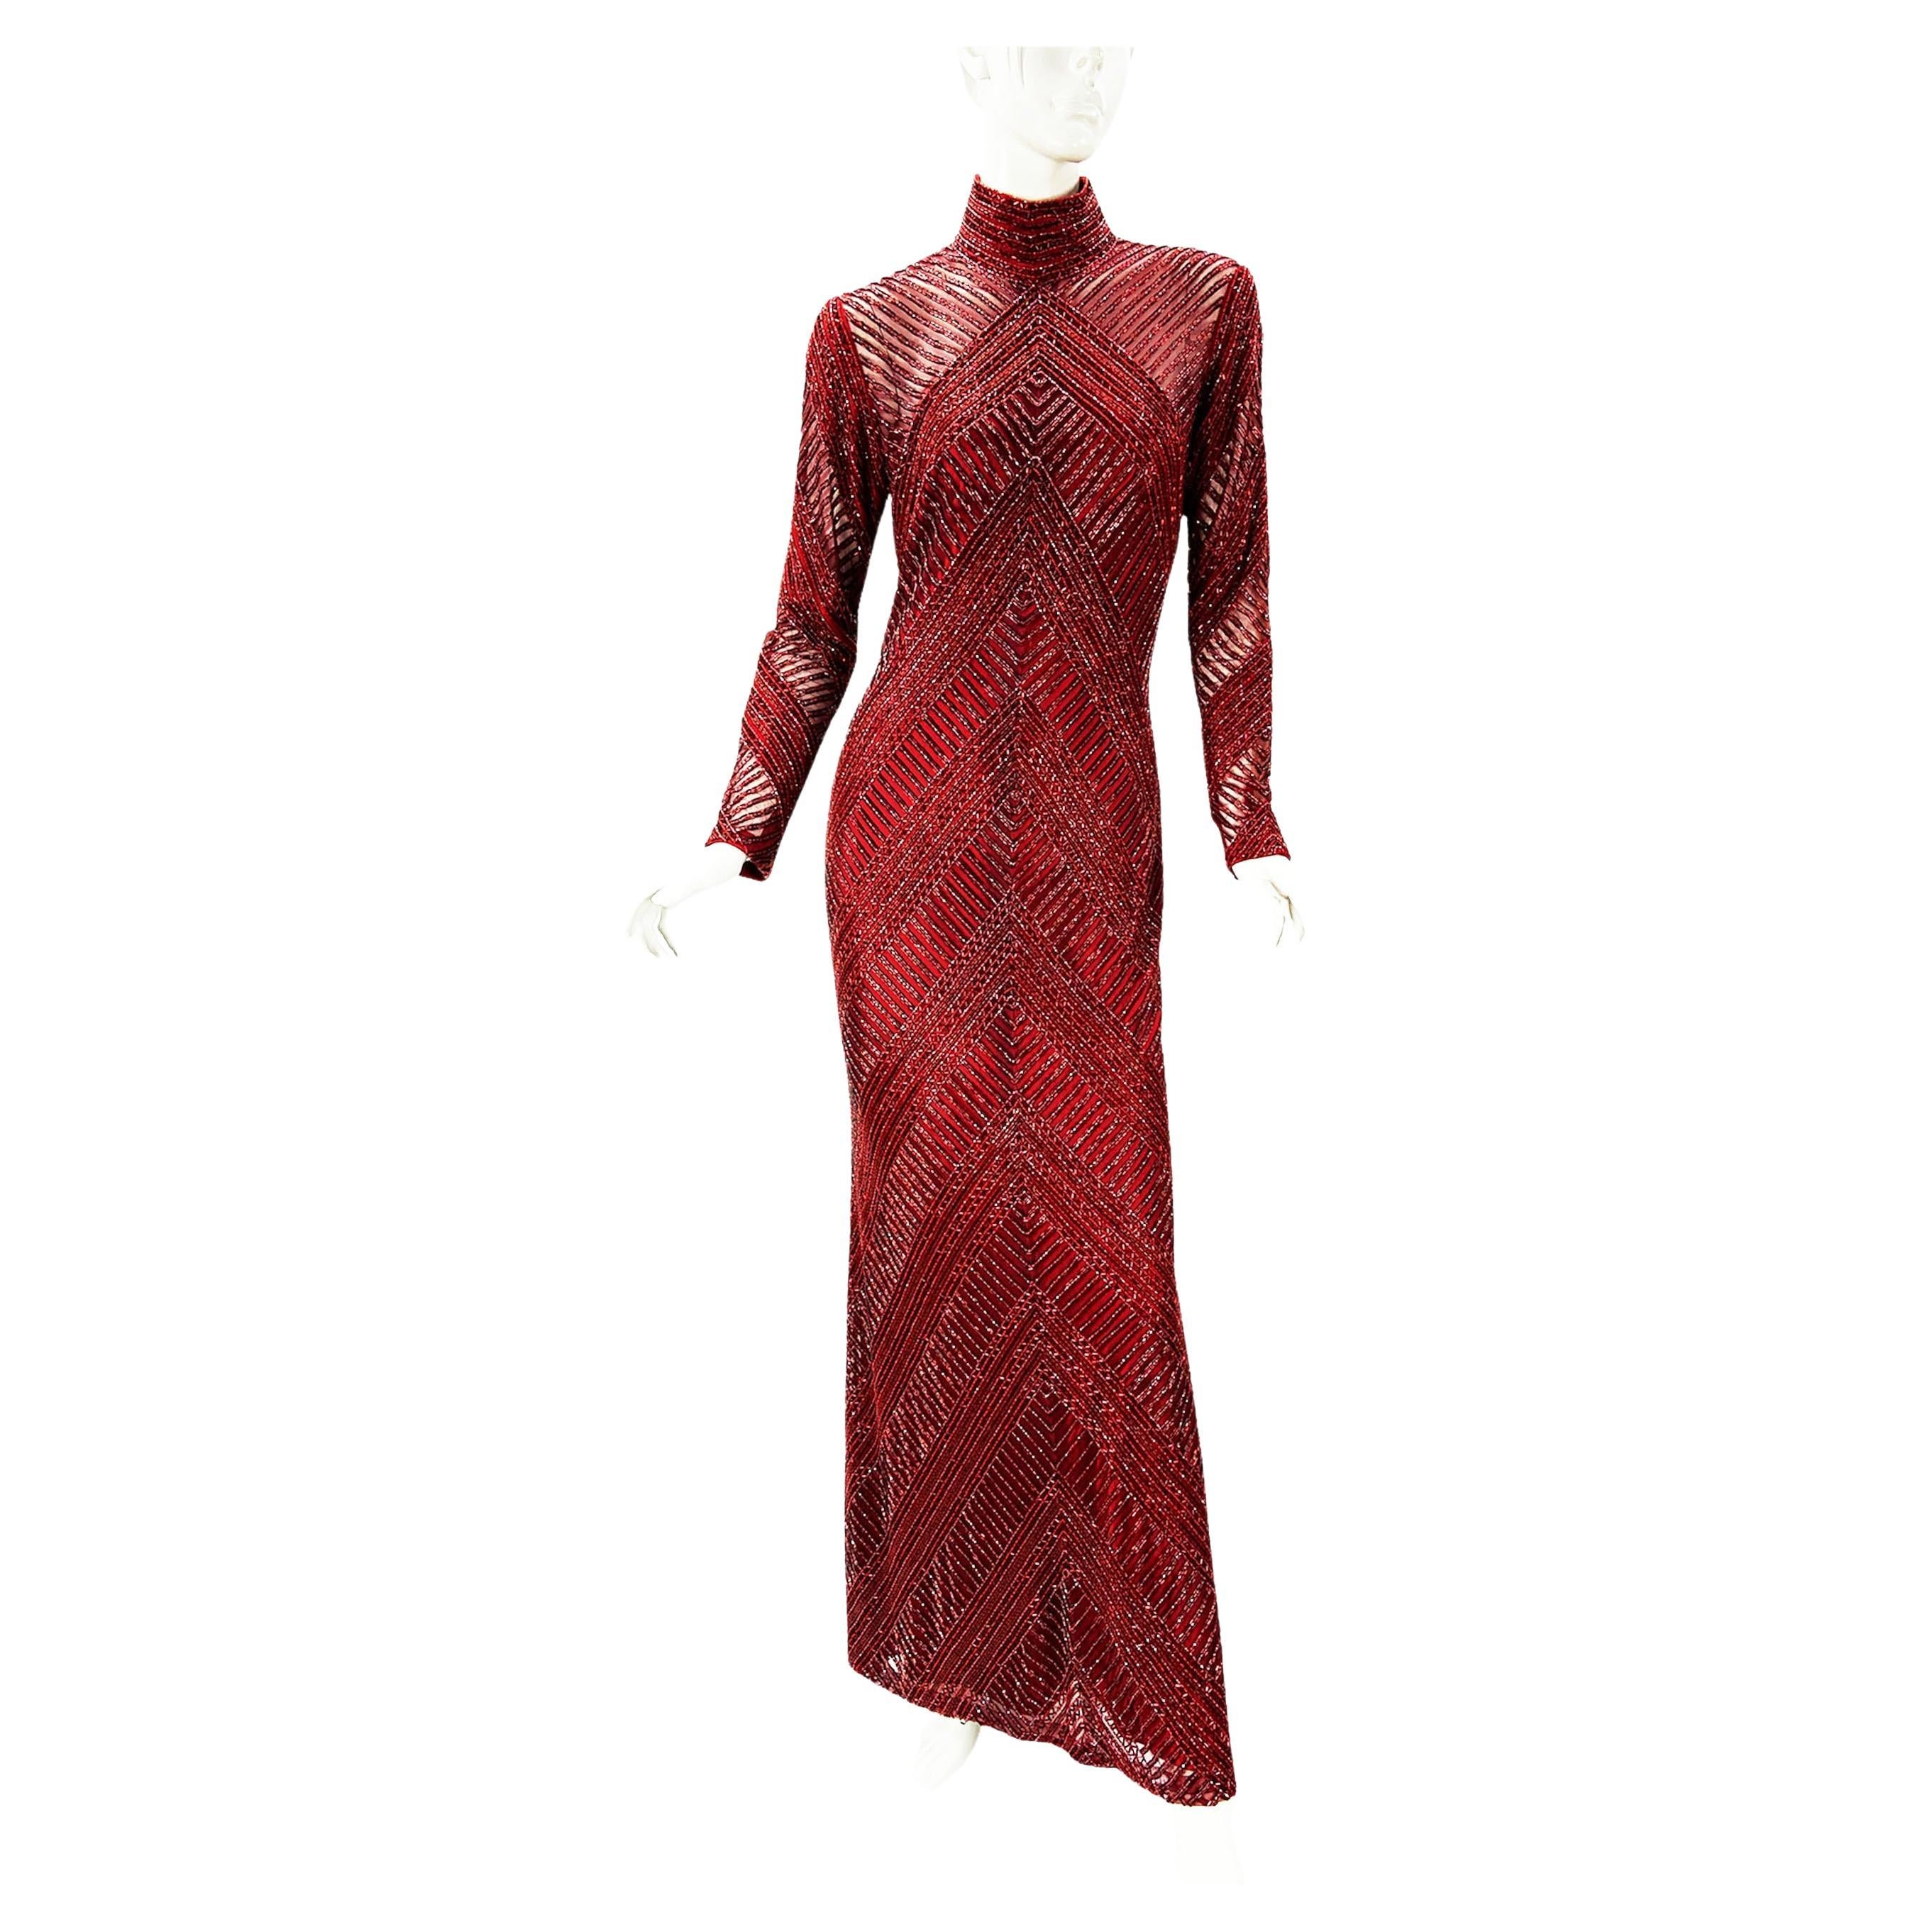 Vintage 80's Bob Mackie Burgundy Fully Beaded Open Back Evening Dress Gown M For Sale